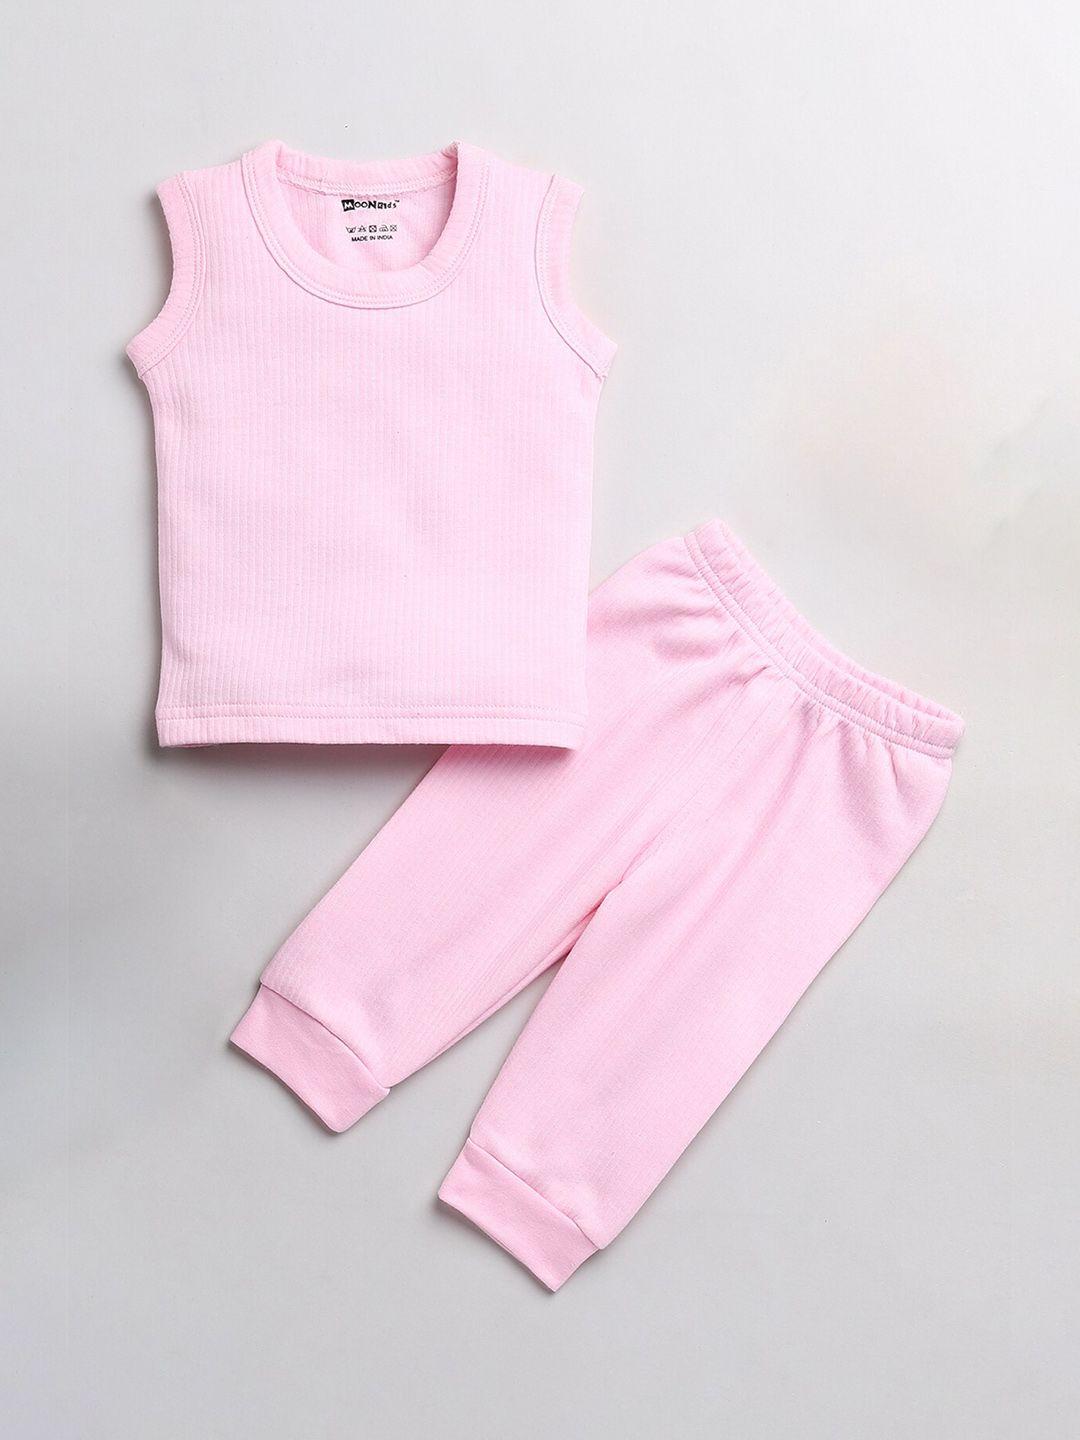 moonkids-boys-pink-solid-sleeveless-cotton-thermal-set